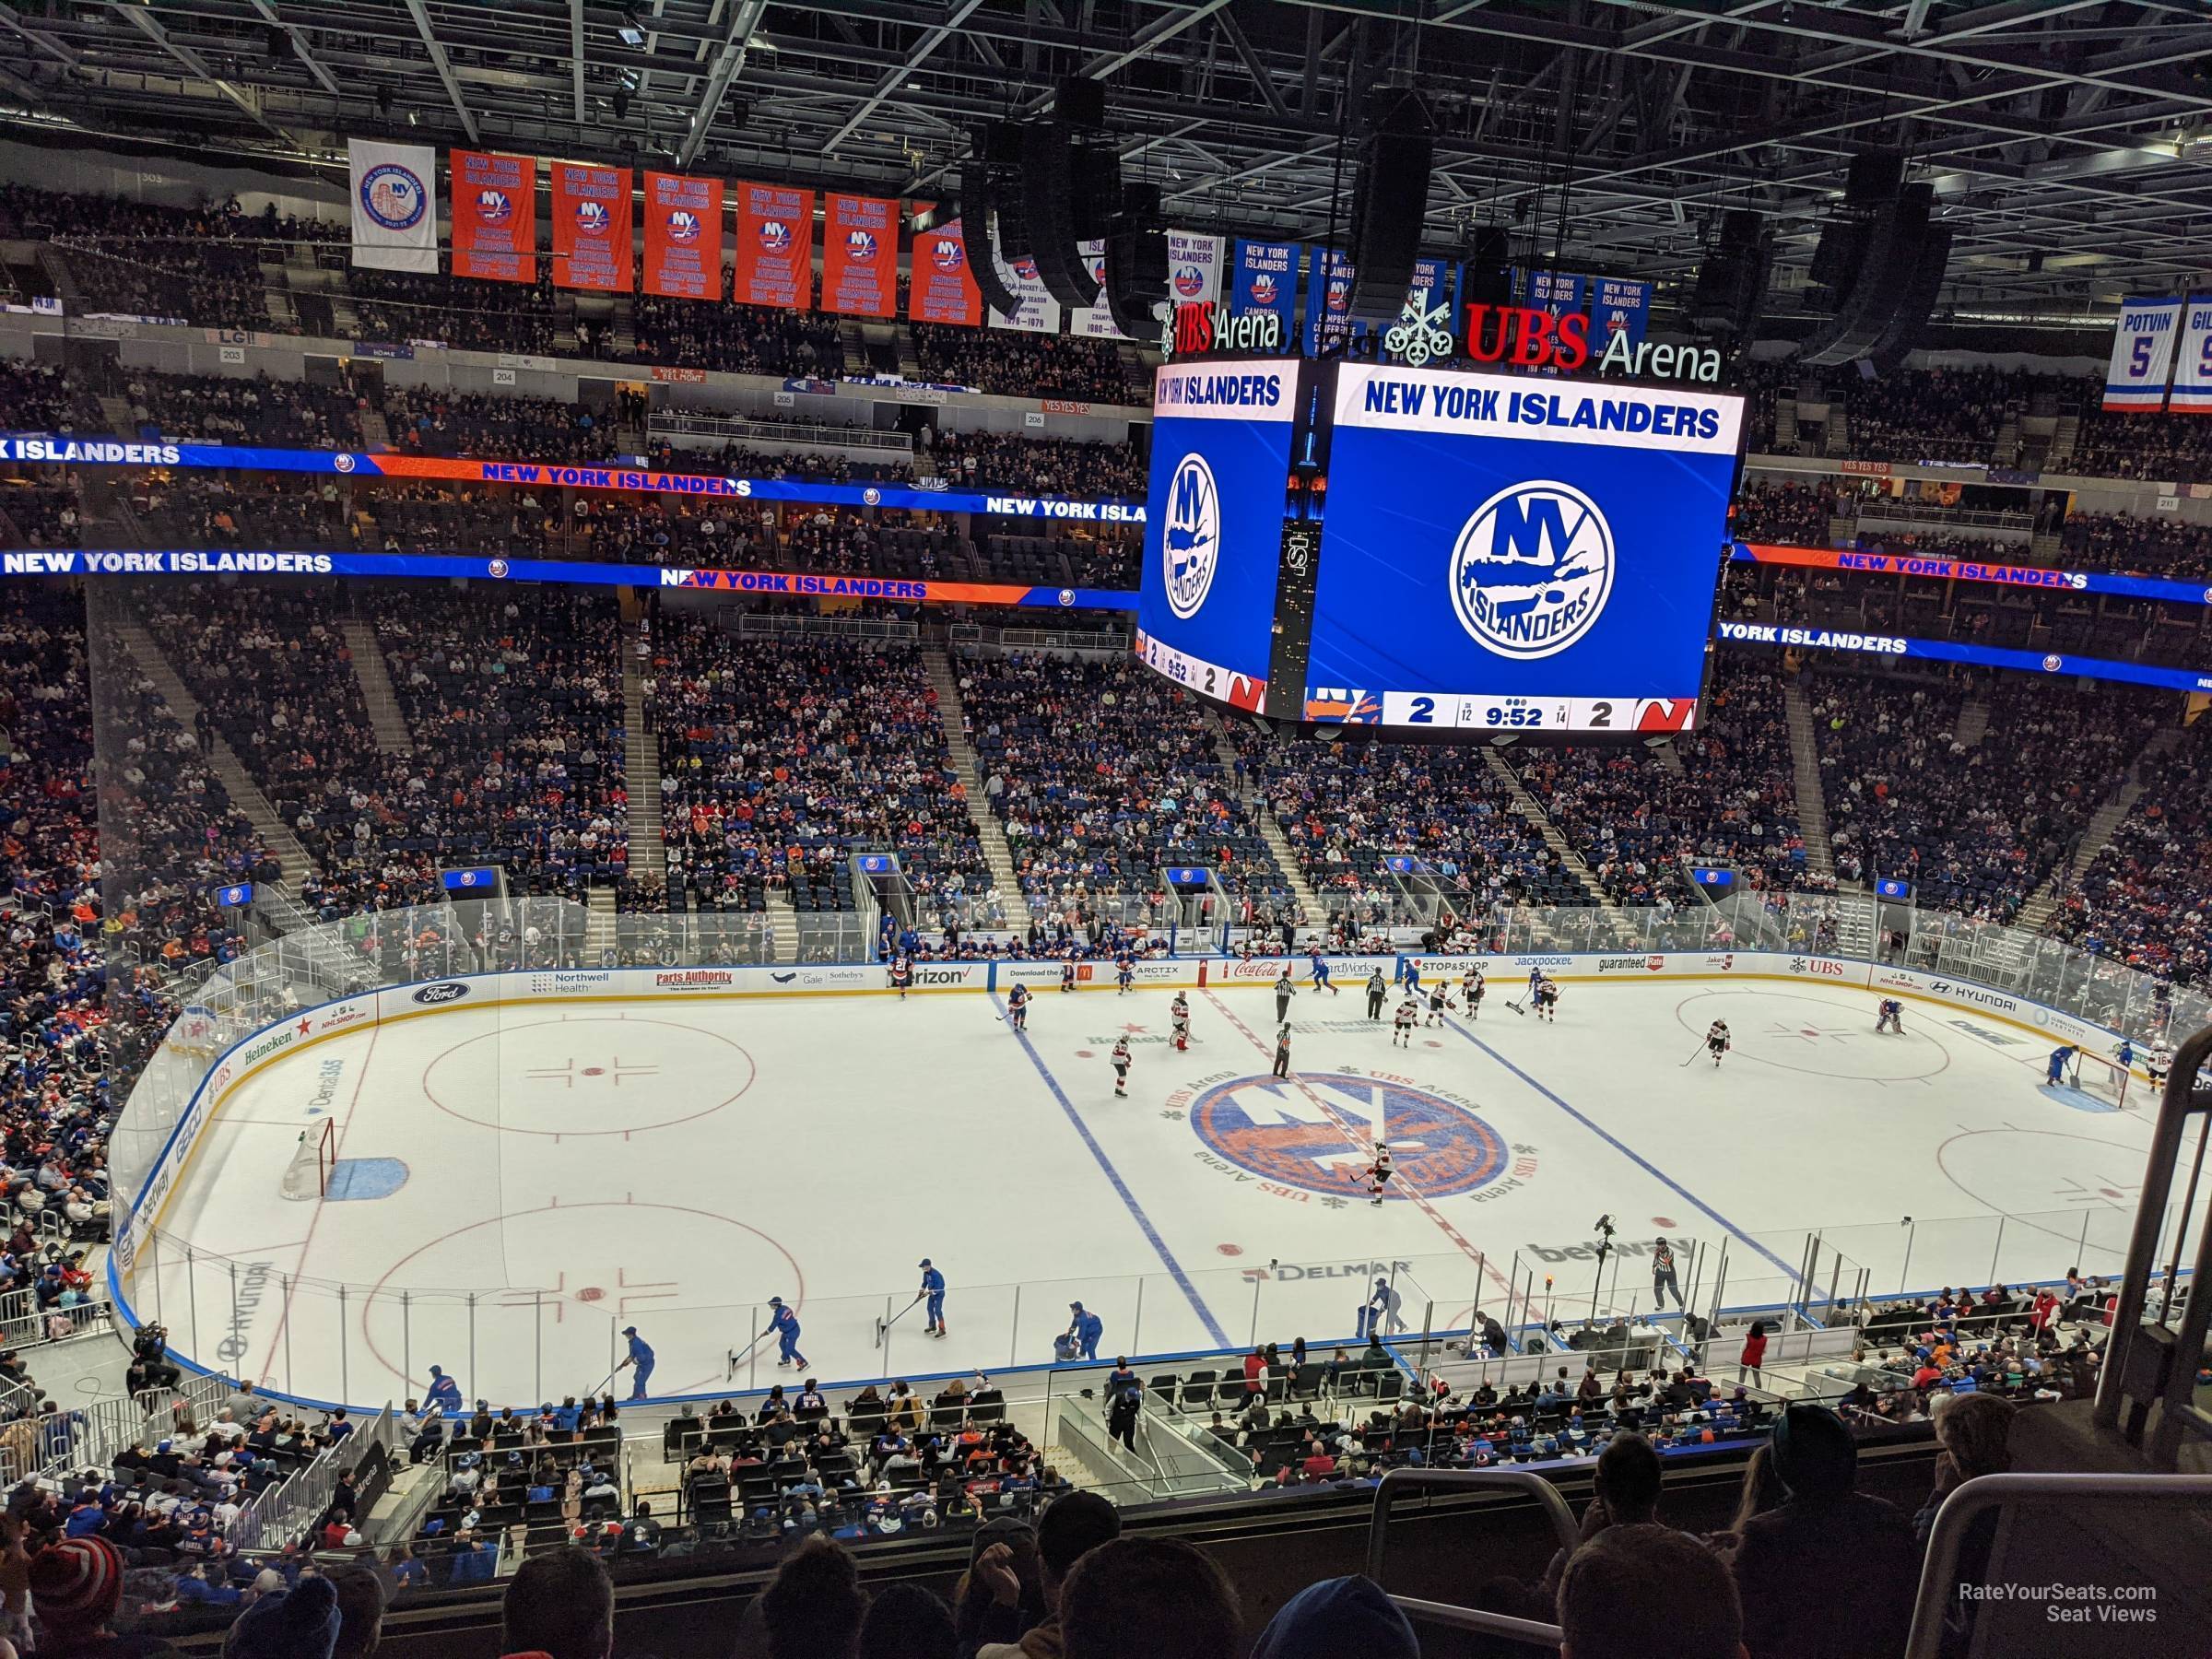 section 223, row 5 seat view  for hockey - ubs arena